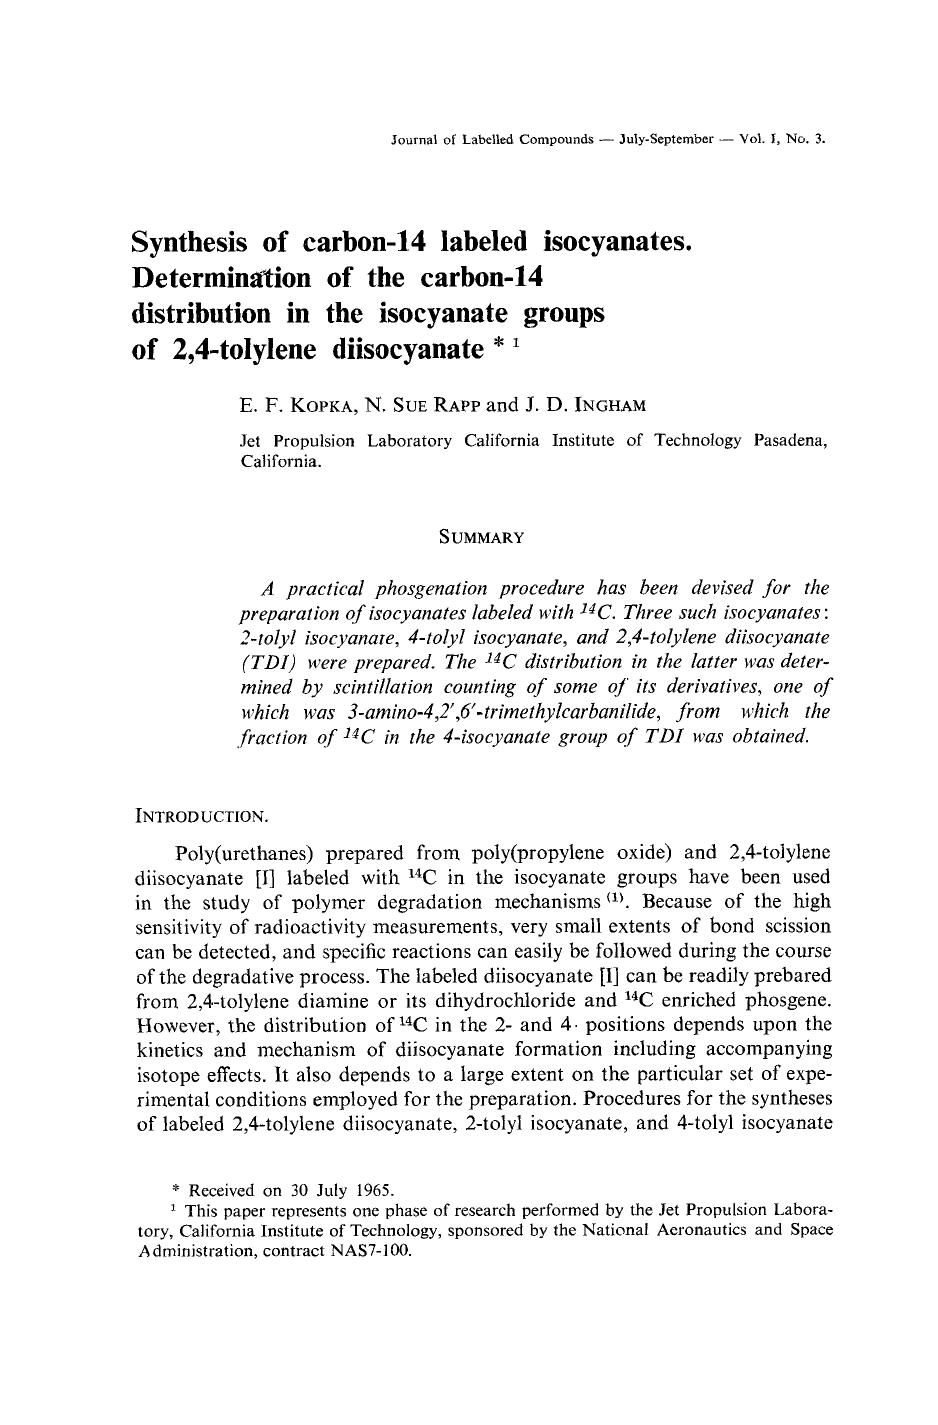 Synthesis of carbon-14 labeled isocyanates. Determination of the carbon-14 distribution in the isocyanate groups of 2, 4-tolylene diisocyanate by Unknown